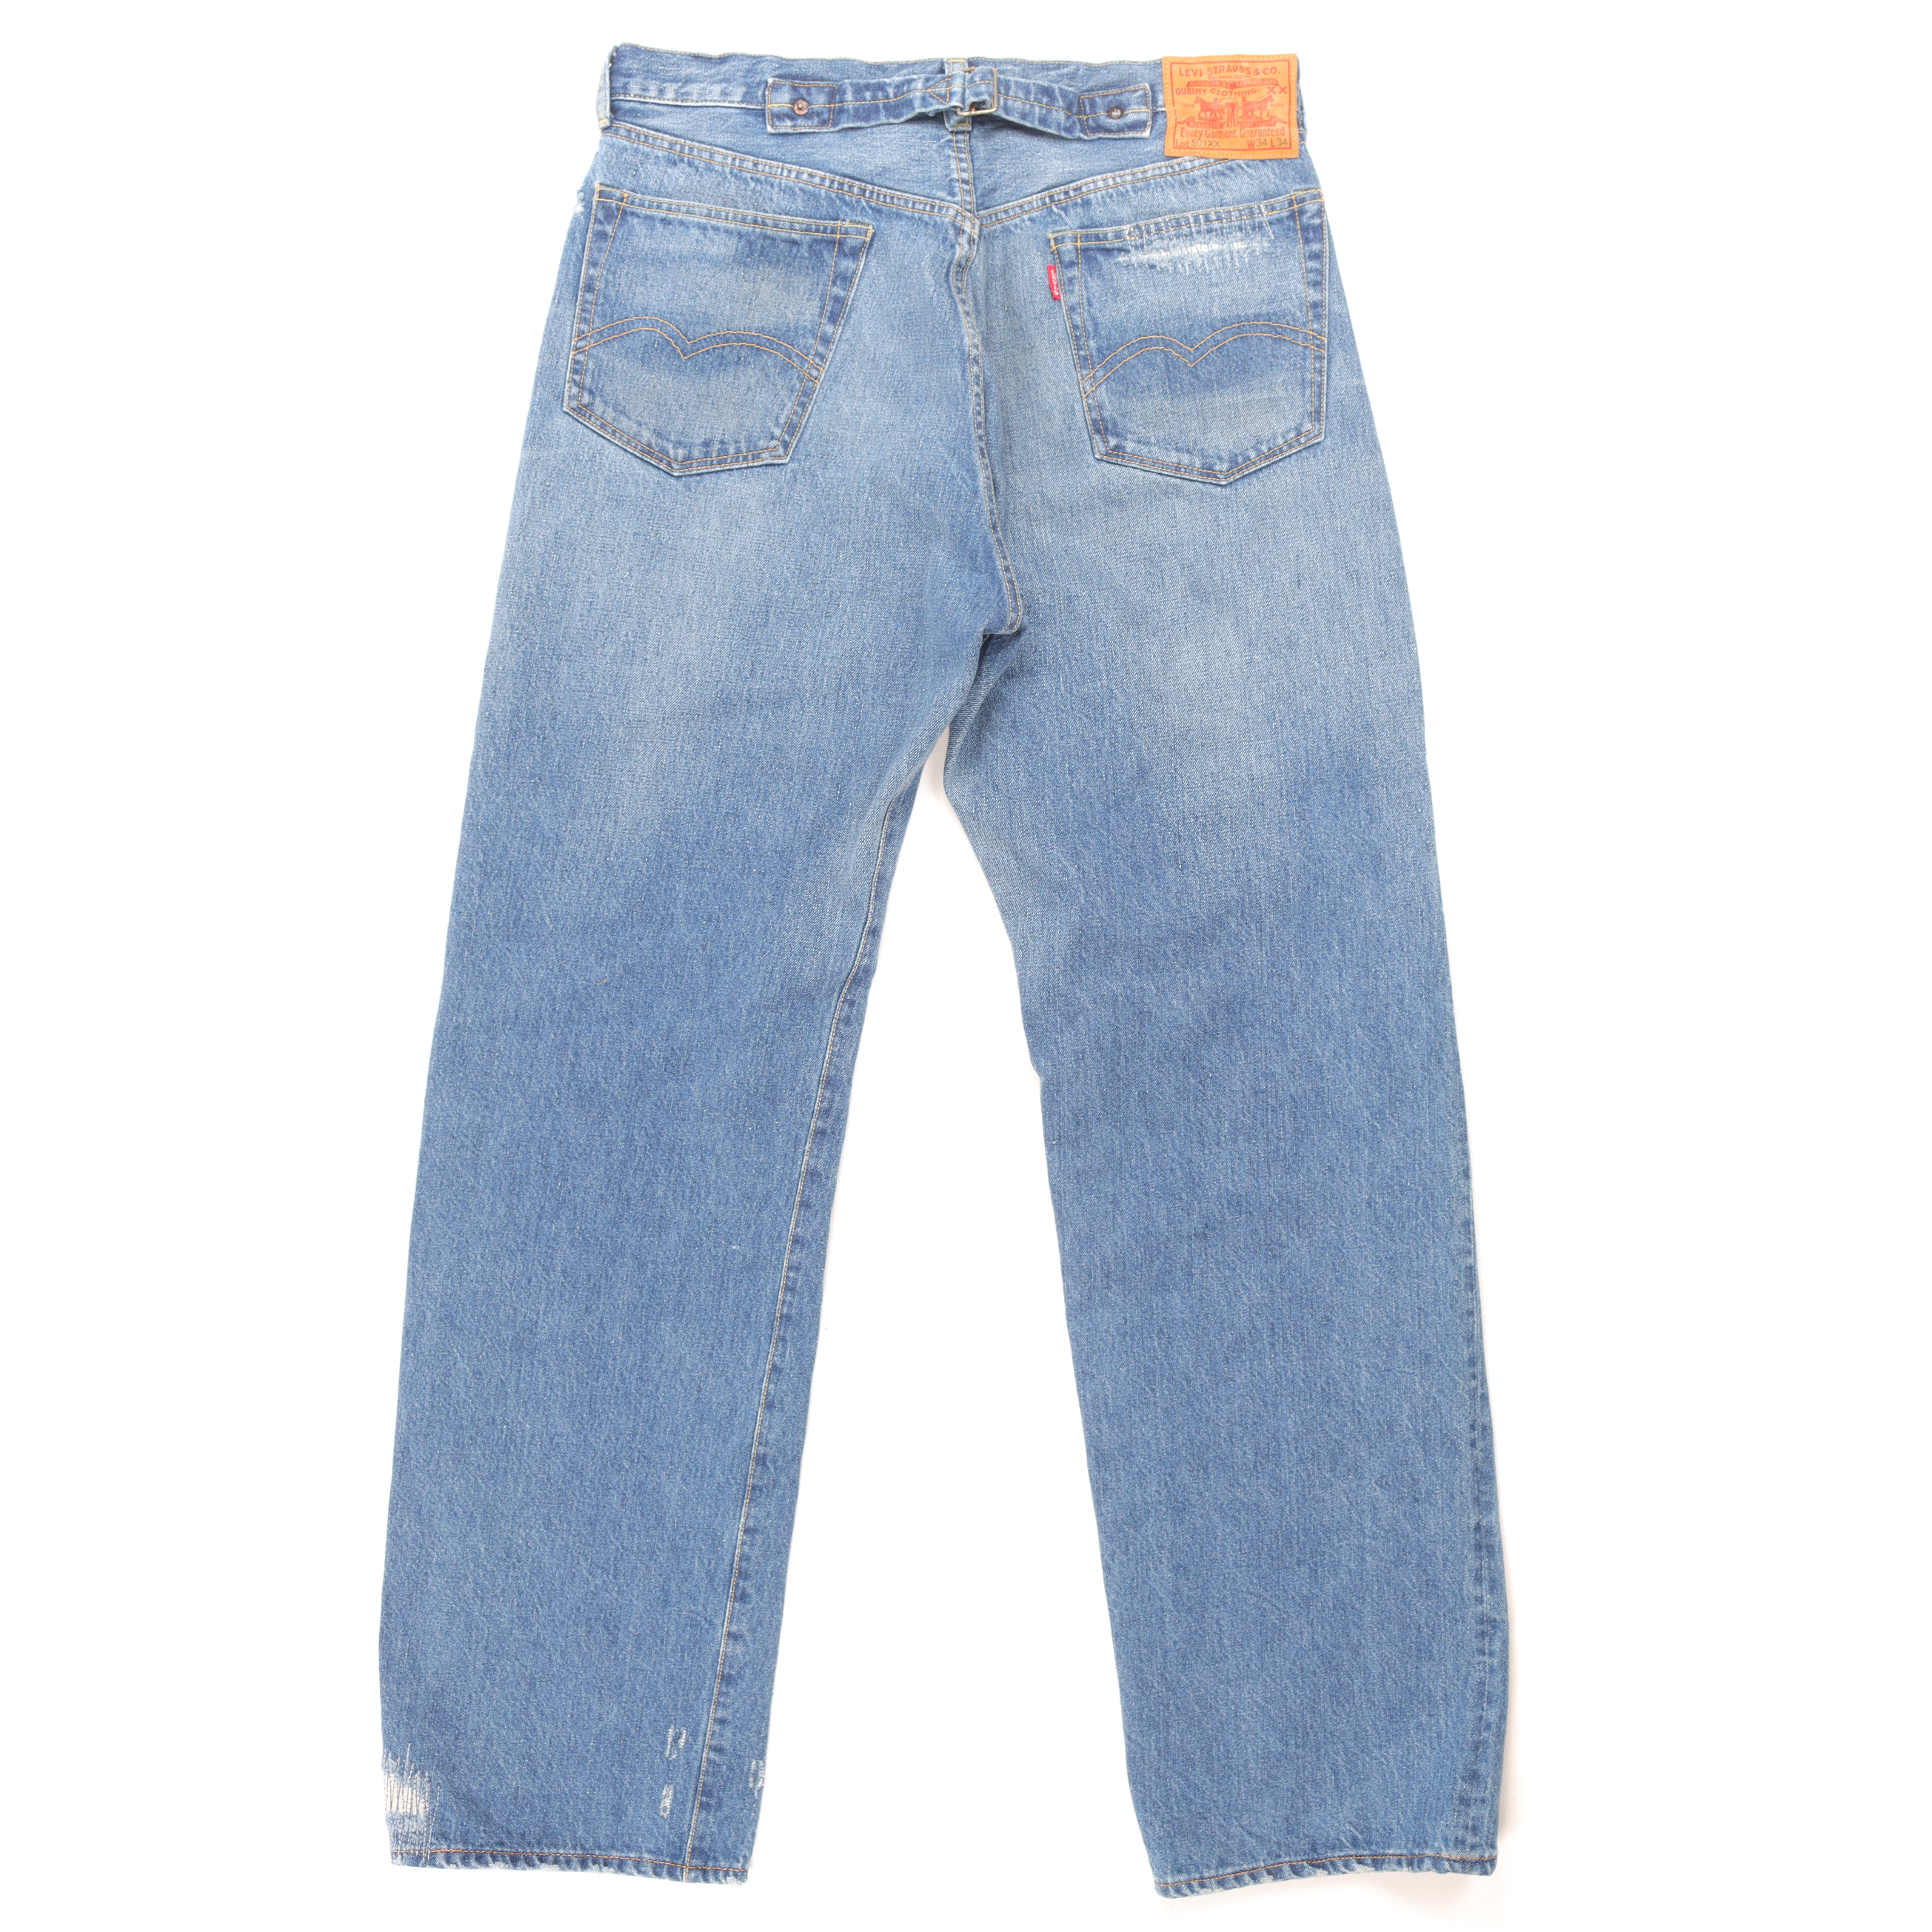 Levi's Repaired Denim w/ Tags